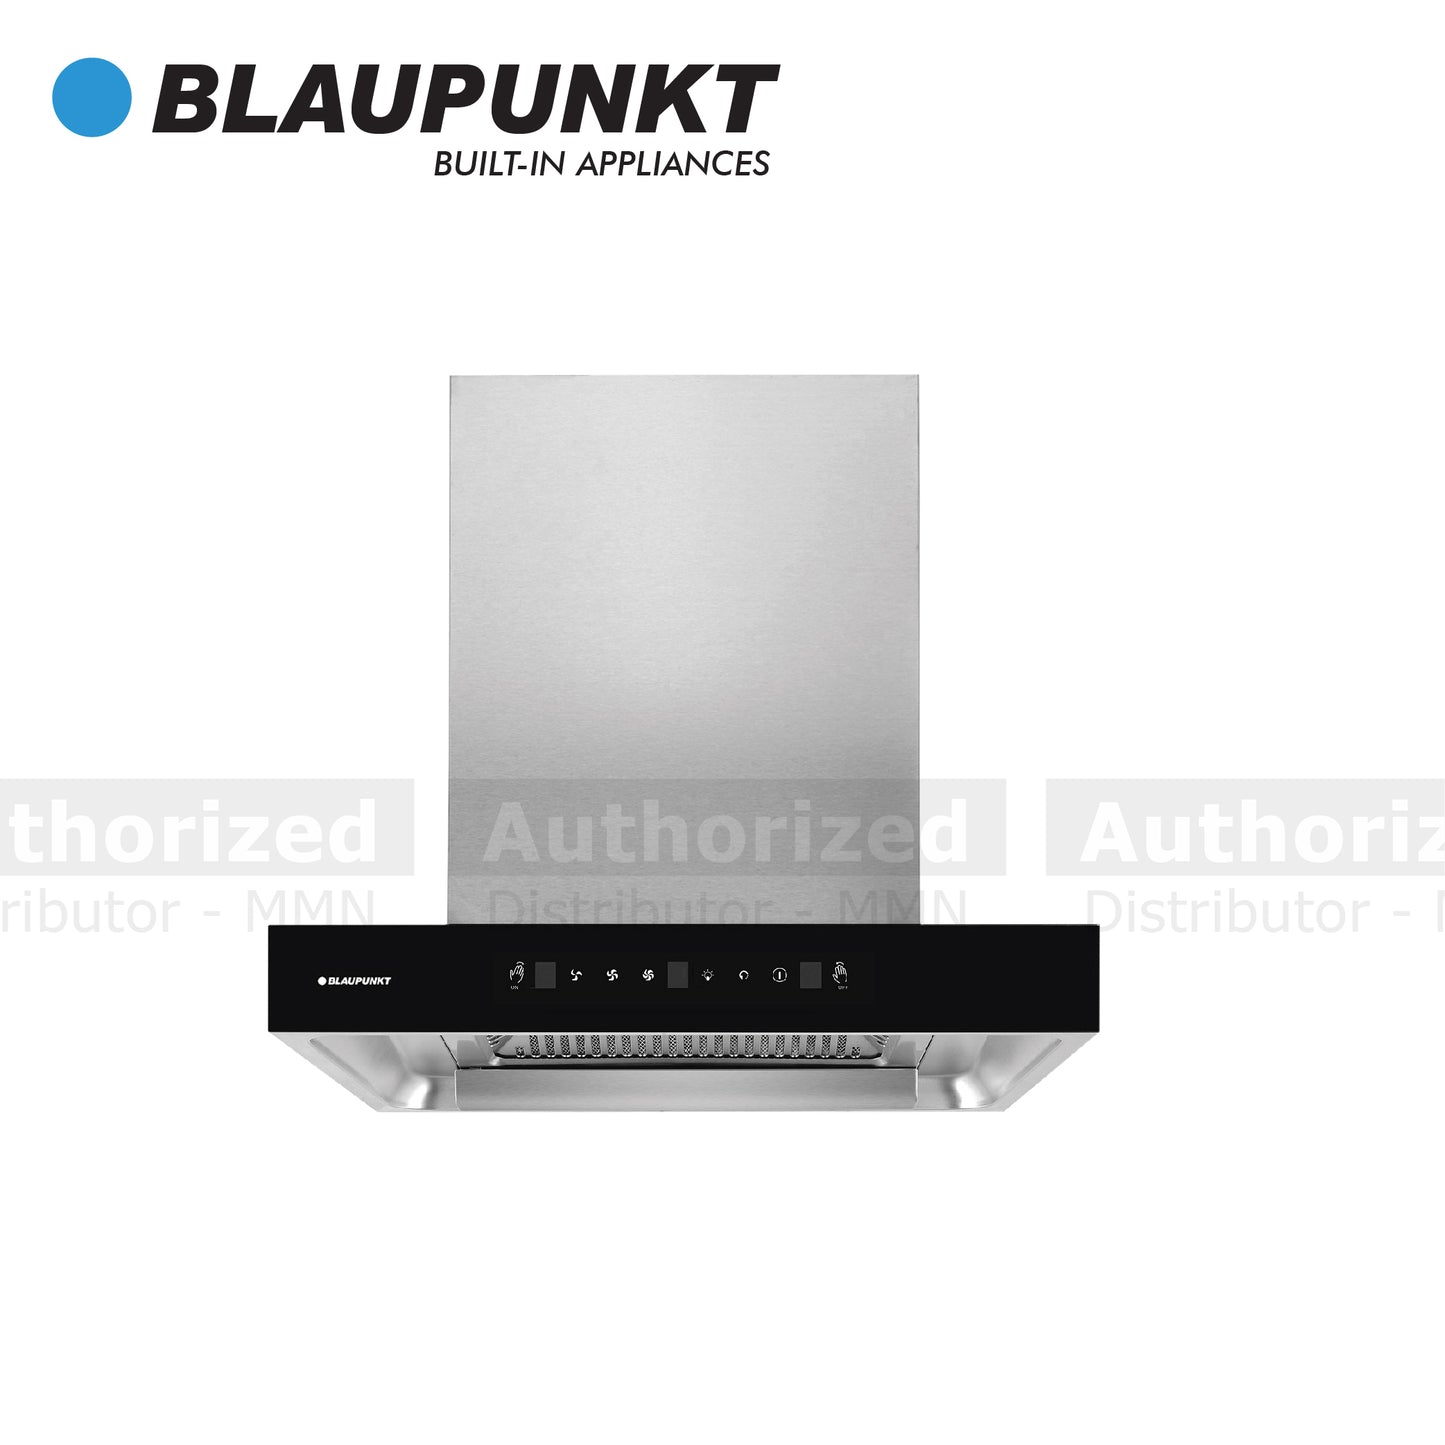 Blaupunkt Cooker Hood, Dimension 63.5x59.5x45.0cm, 60cm, Stainless Steel / Black Tempered Front-Glass - BLAU5IS66751